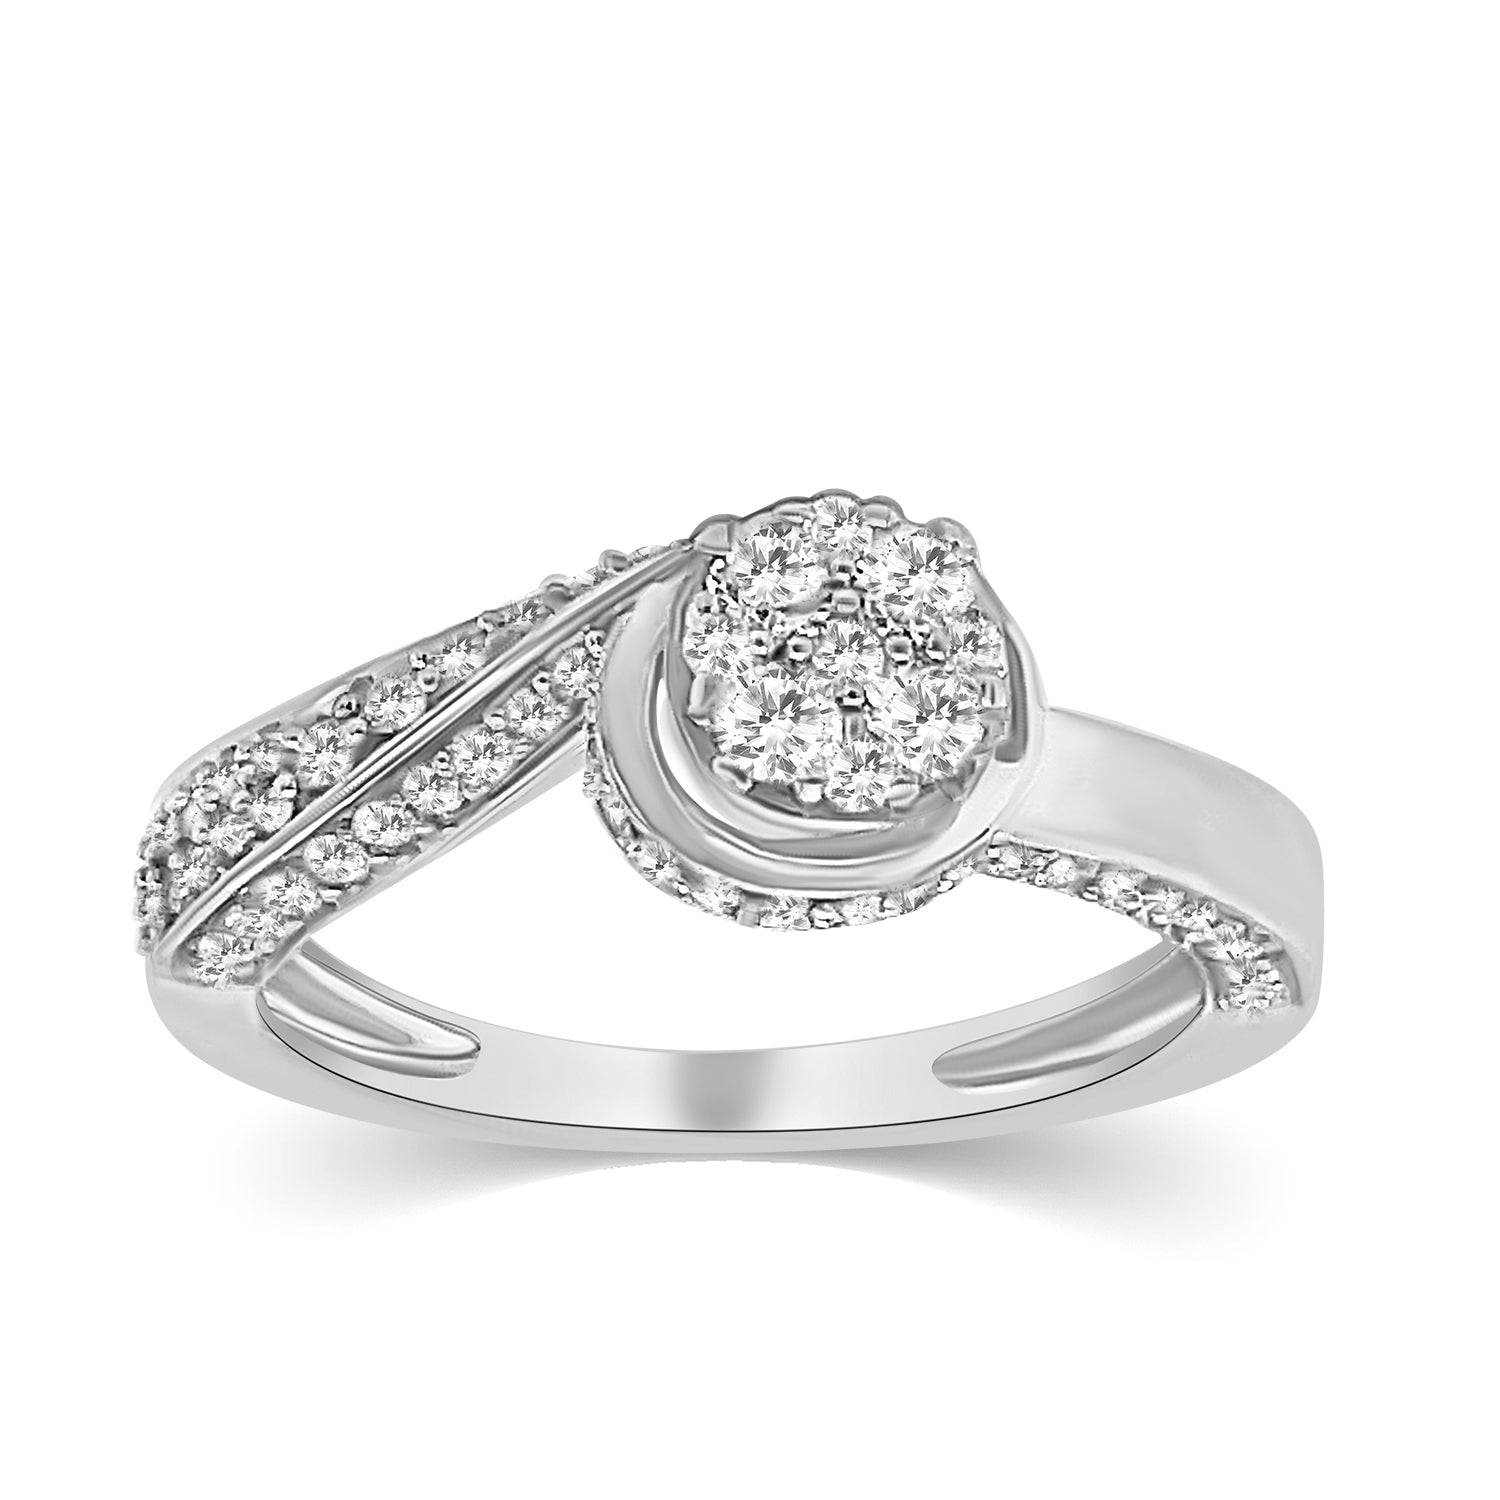 Round Engagement / Promise Ring with 0.58 Carat TW of Diamonds in 10K White Gold